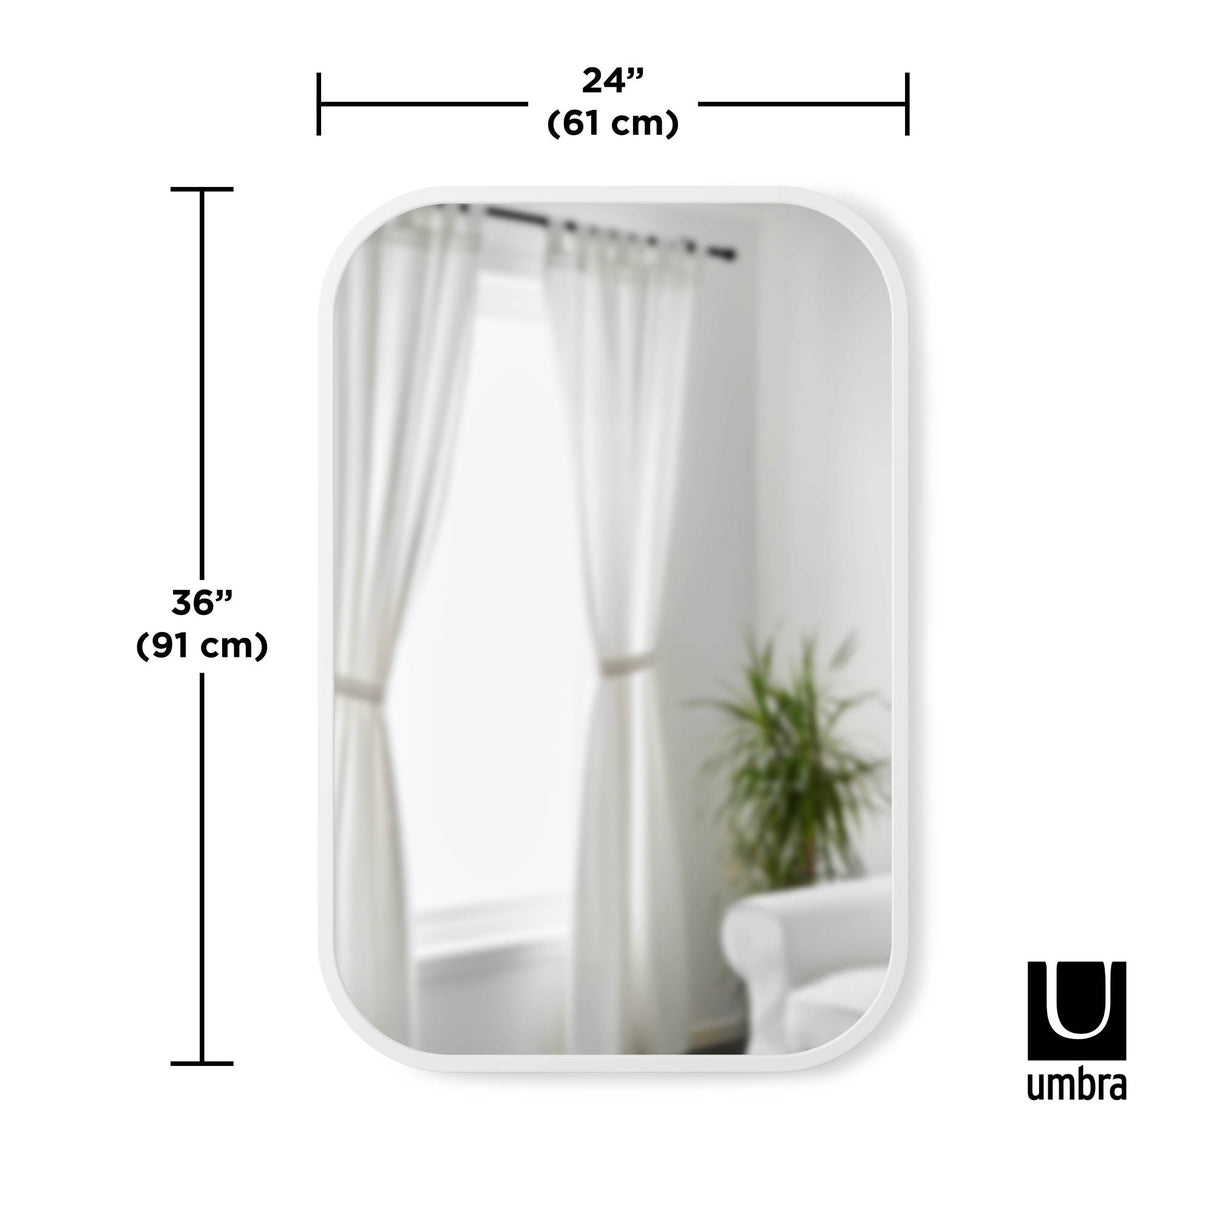 Wall Mirrors | color: White | size: 24x36" (61x91 cm)